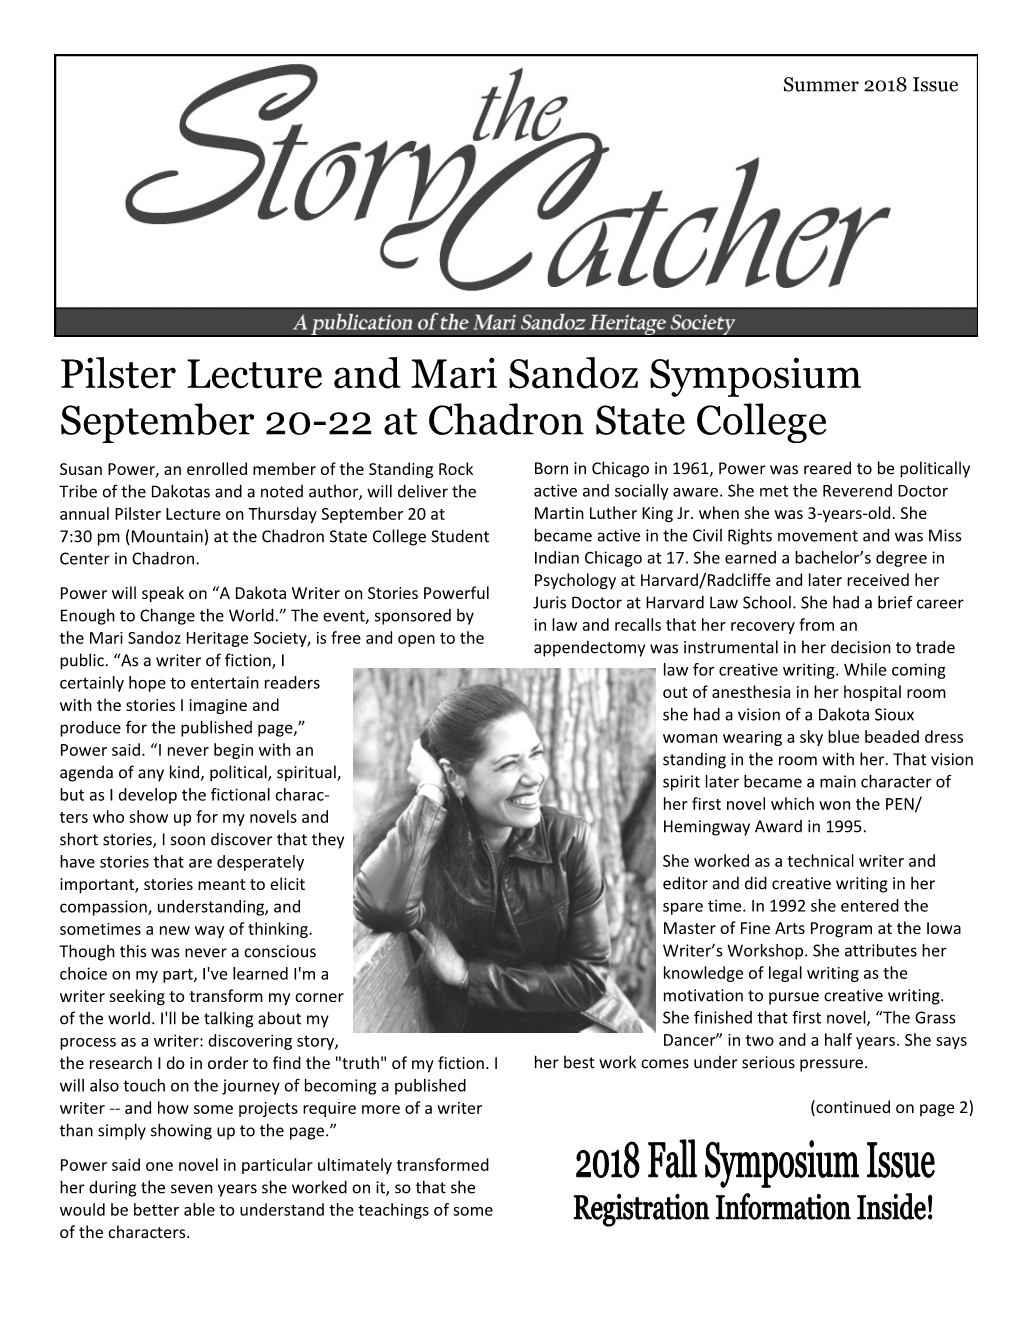 Pilster Lecture and Mari Sandoz Symposium September 20-22 At